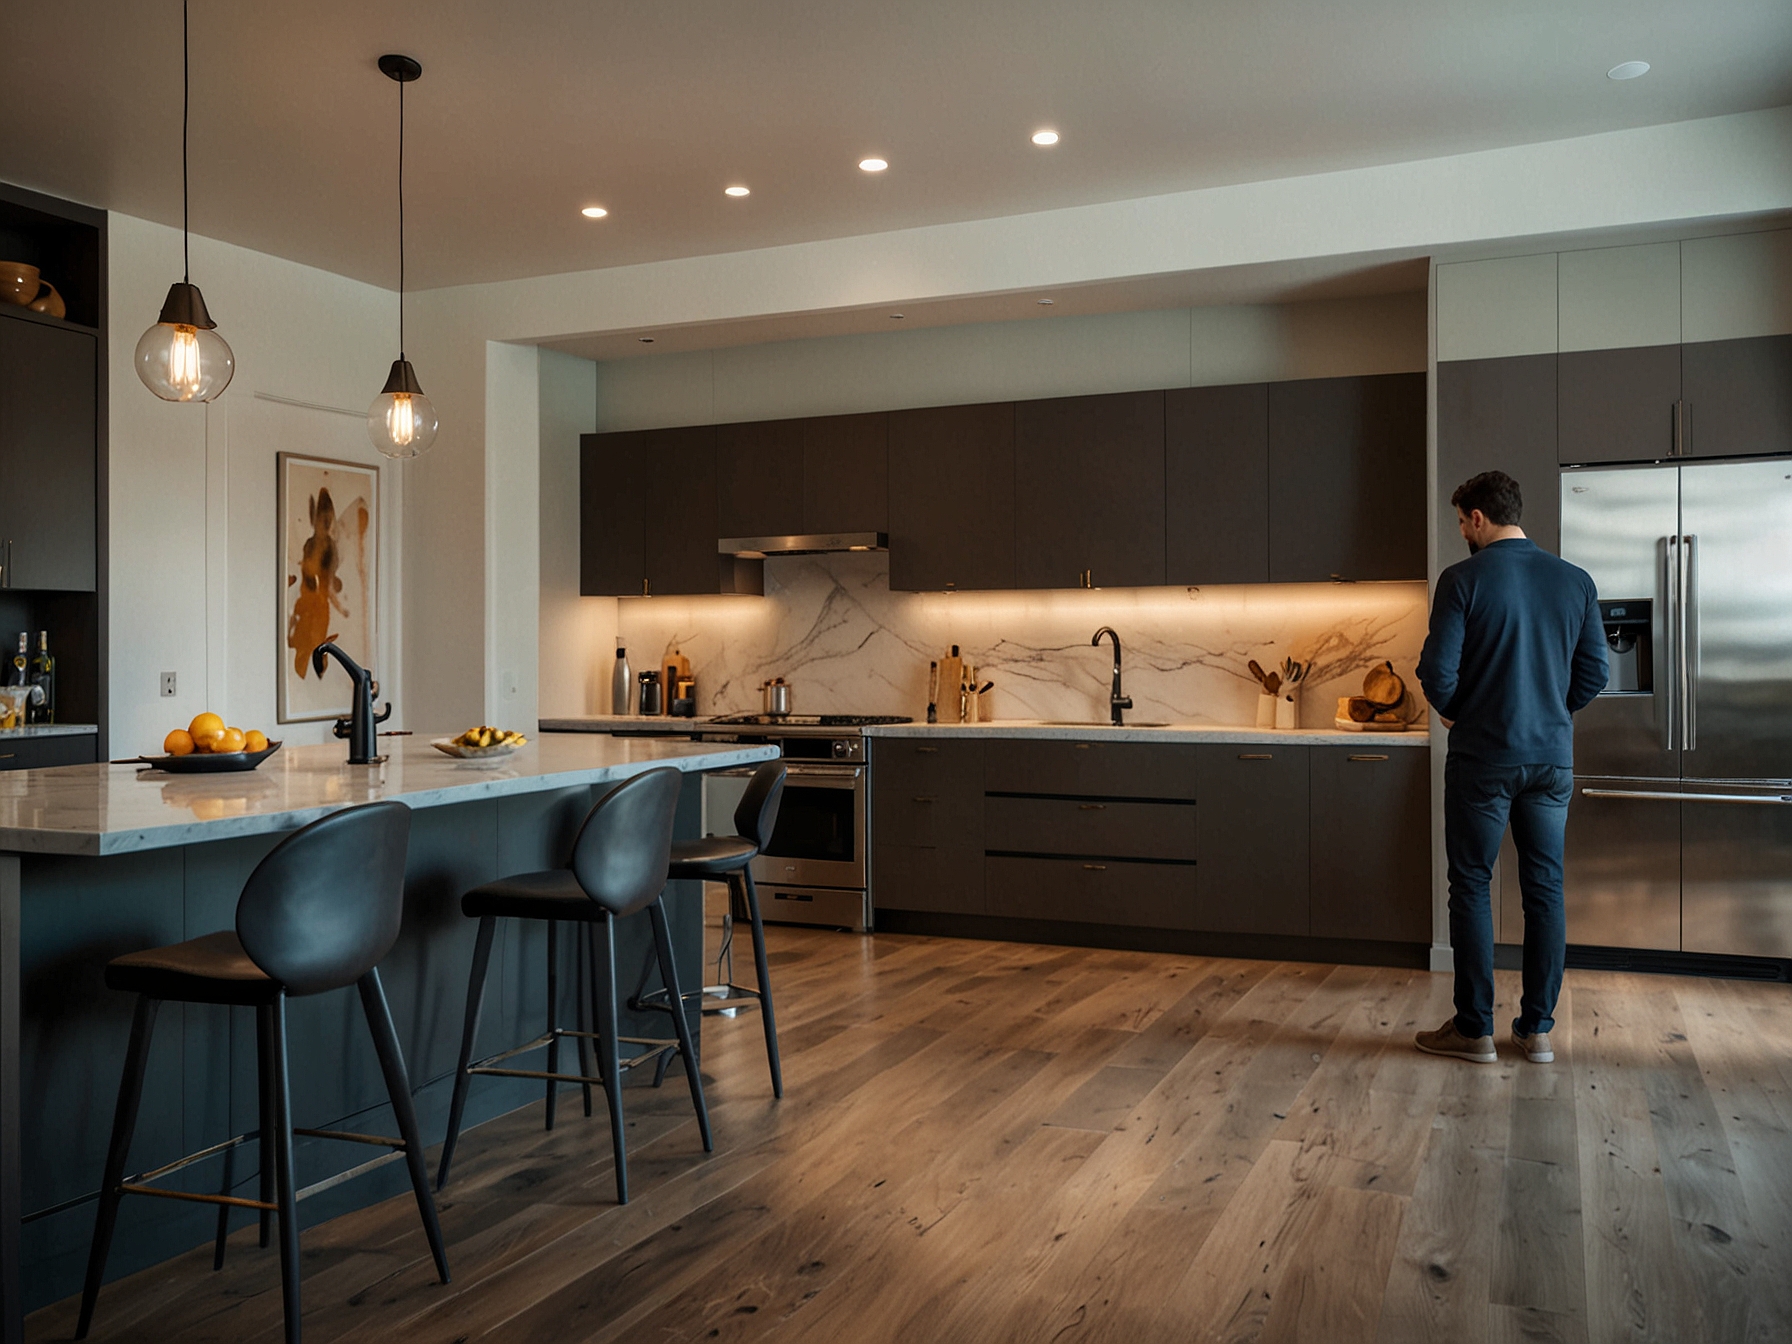 The couple enjoying their new open-concept kitchen, featuring custom cabinetry, a spacious island for socializing, top-of-the-line appliances, and a stylish backsplash.